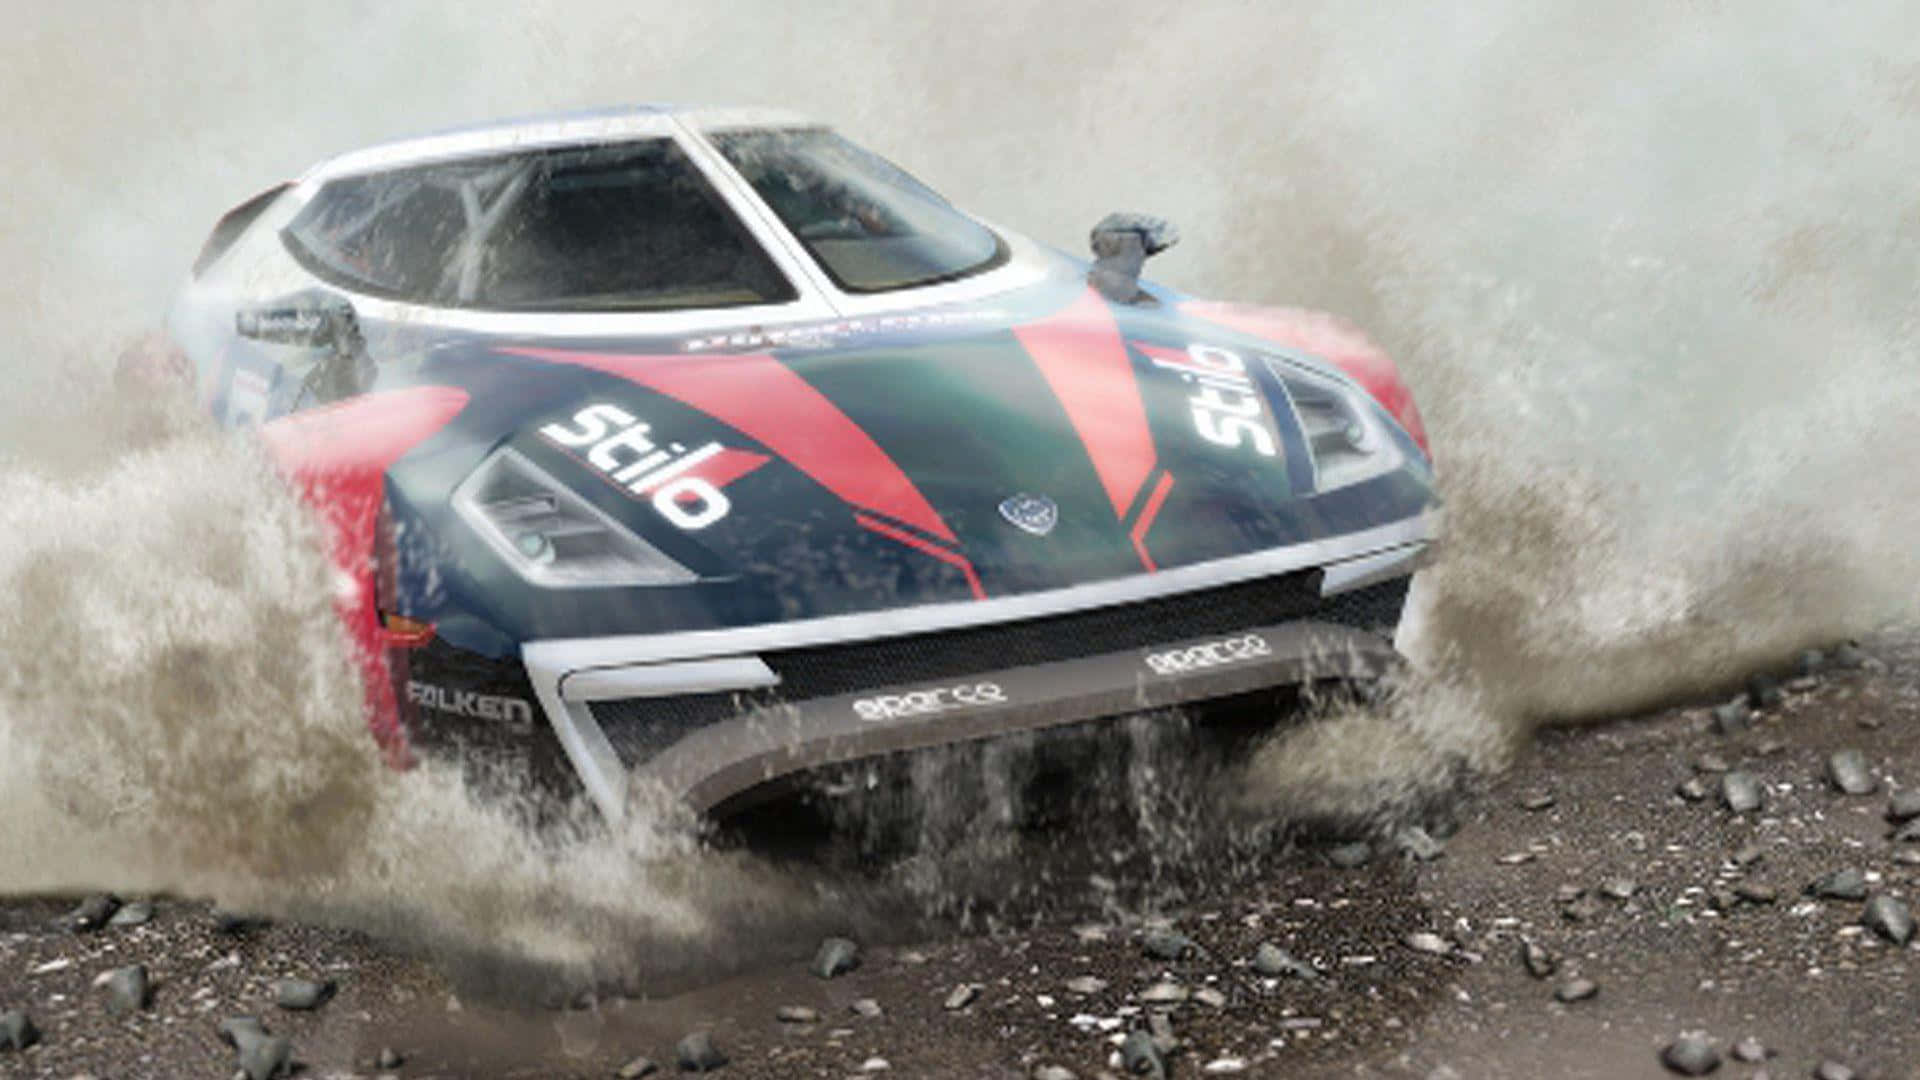 Challenge opponents to the ultimate dirt showdown and prove you’re the best